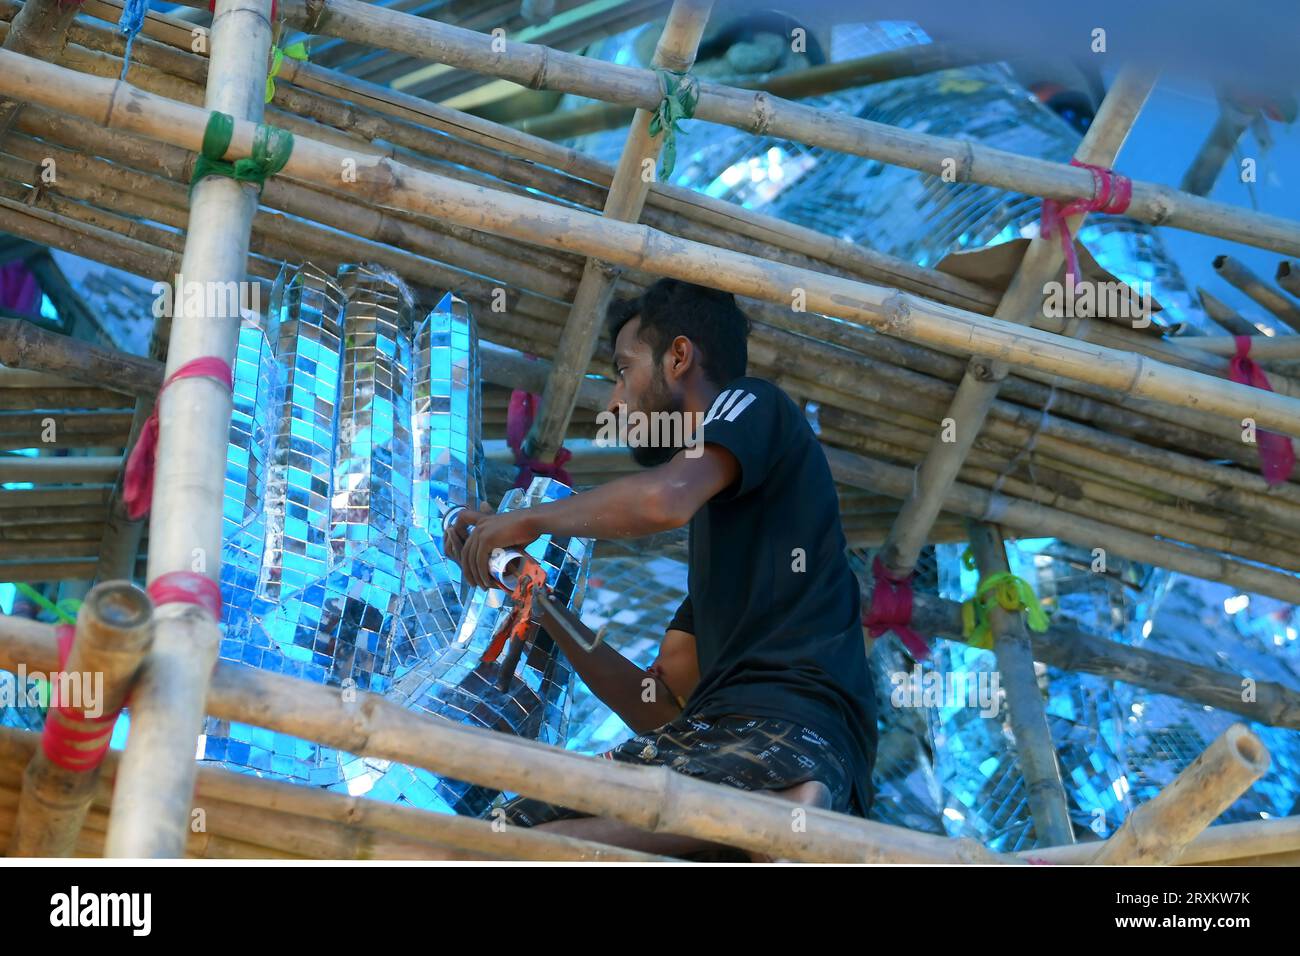 An artist is pasting glass pieces to make a 41 feet tall Ganesh idol, fully covered by glass, ahead of Ganesh Chaturthi festival in a pandal in Ranir bazar. Agartala. Tripura. India. Stock Photo